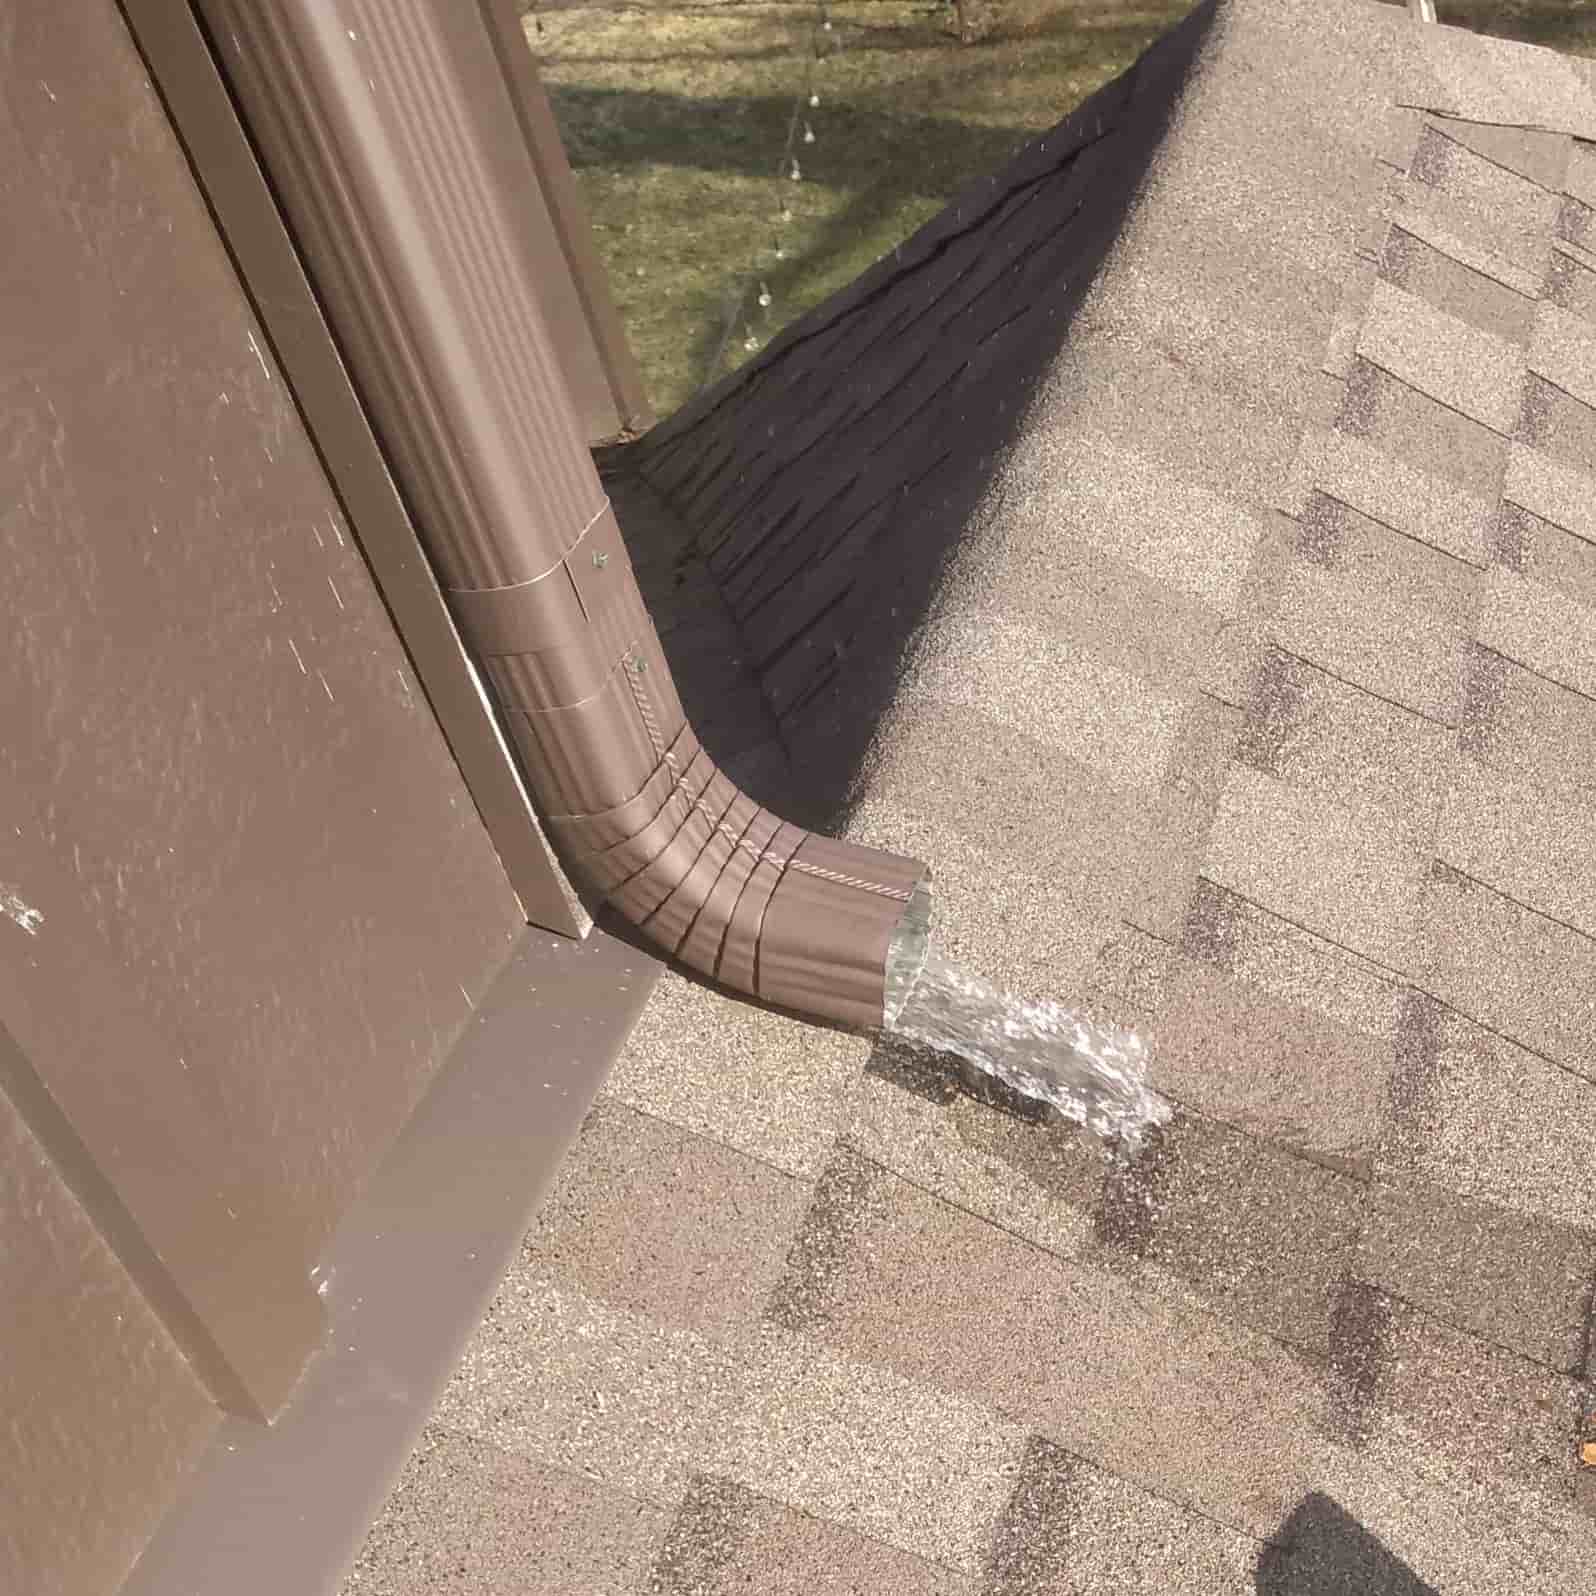 gutter clean out tool